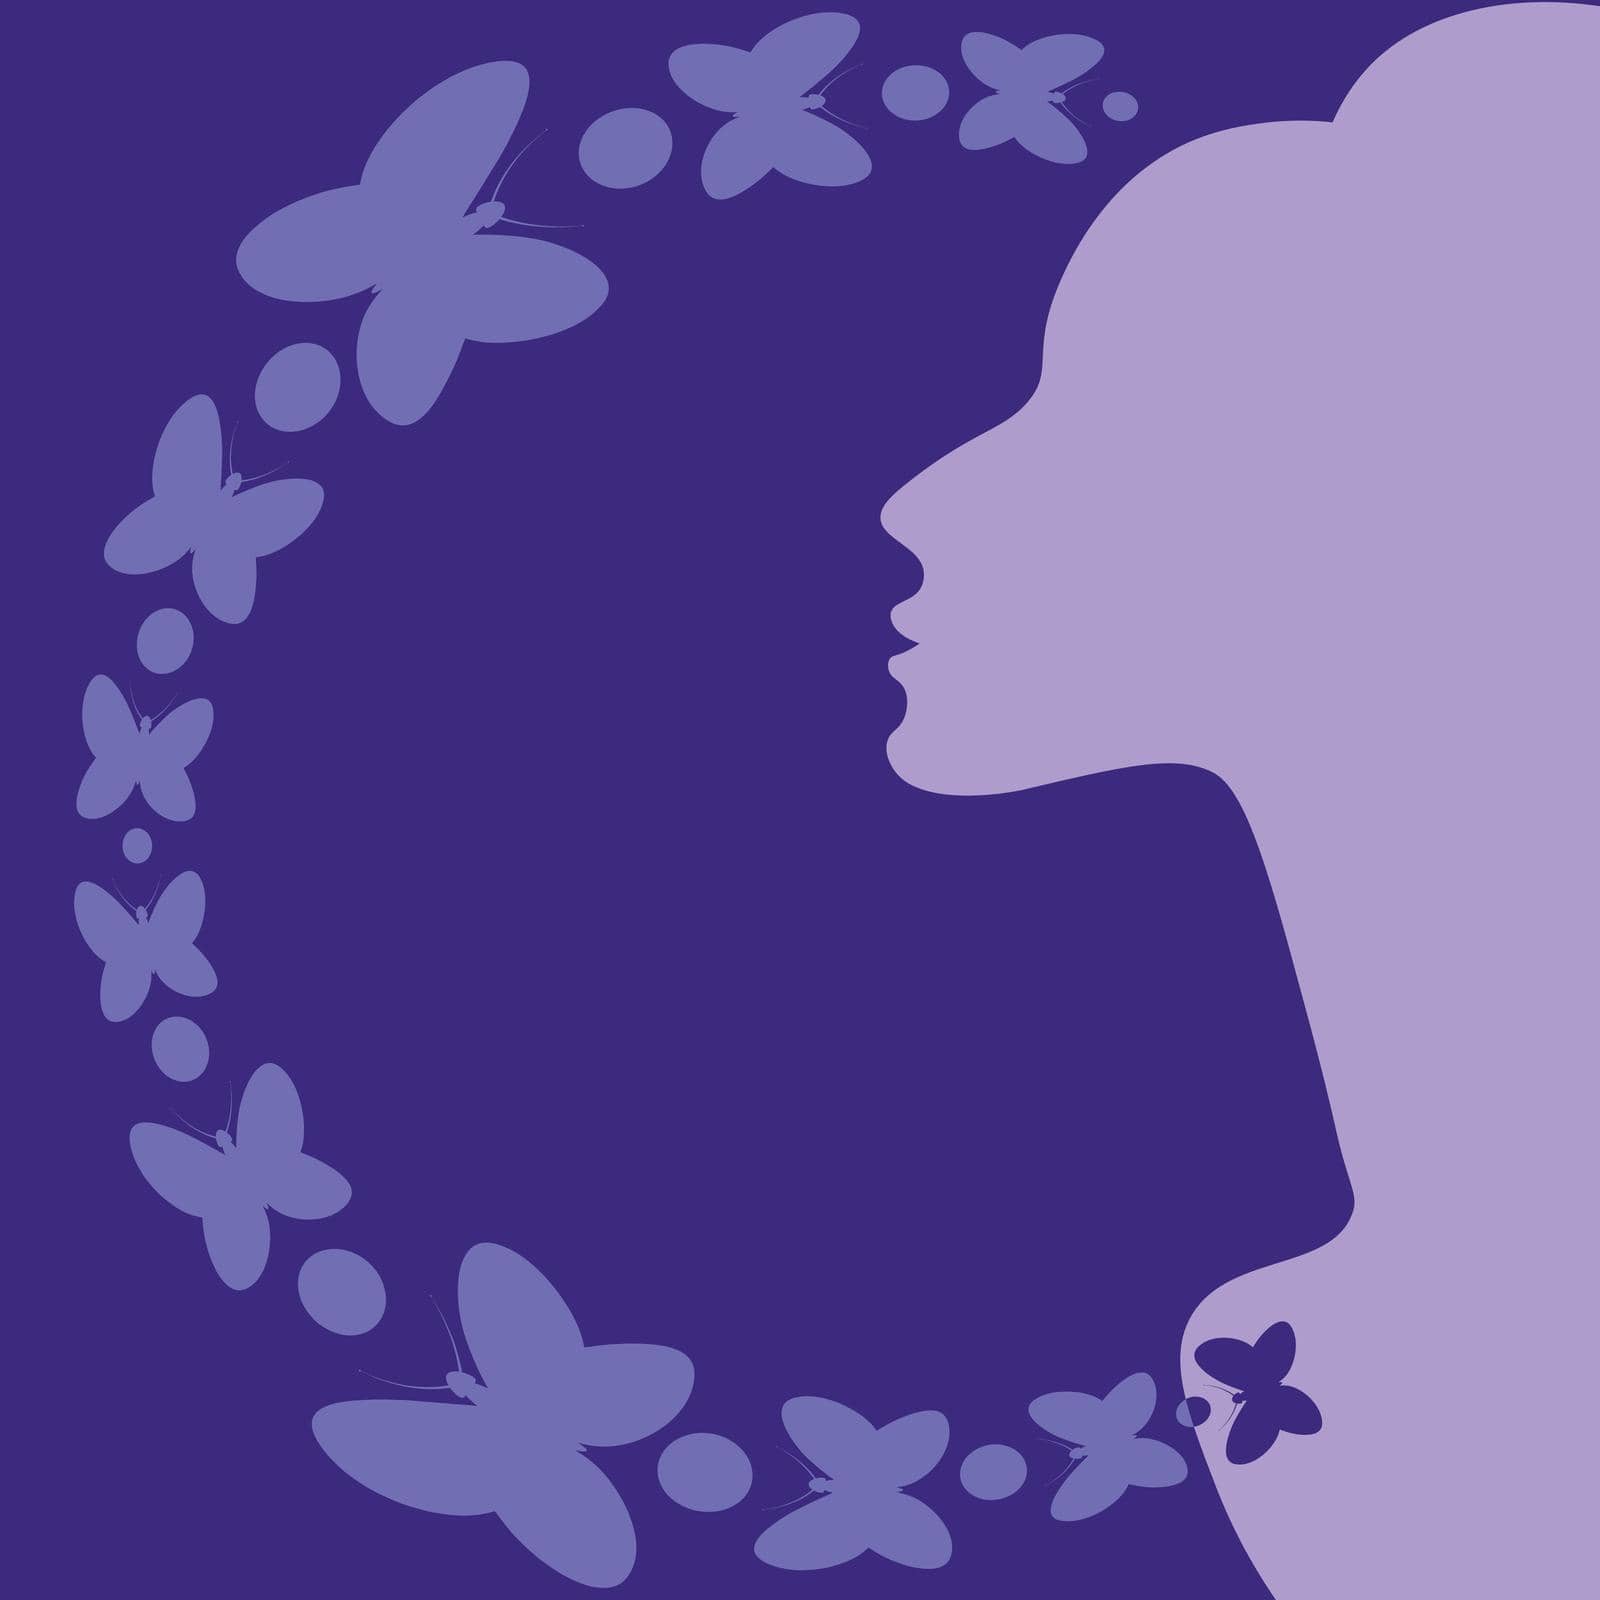 Illustration on a square background on the theme of inspiration - elegant female profile and butterflies. Design element of books, notebooks, postcards, interior items. Background for a website, mobile app, or blog. Inspiration, femininity, magic, surreal, feminine charm, charm